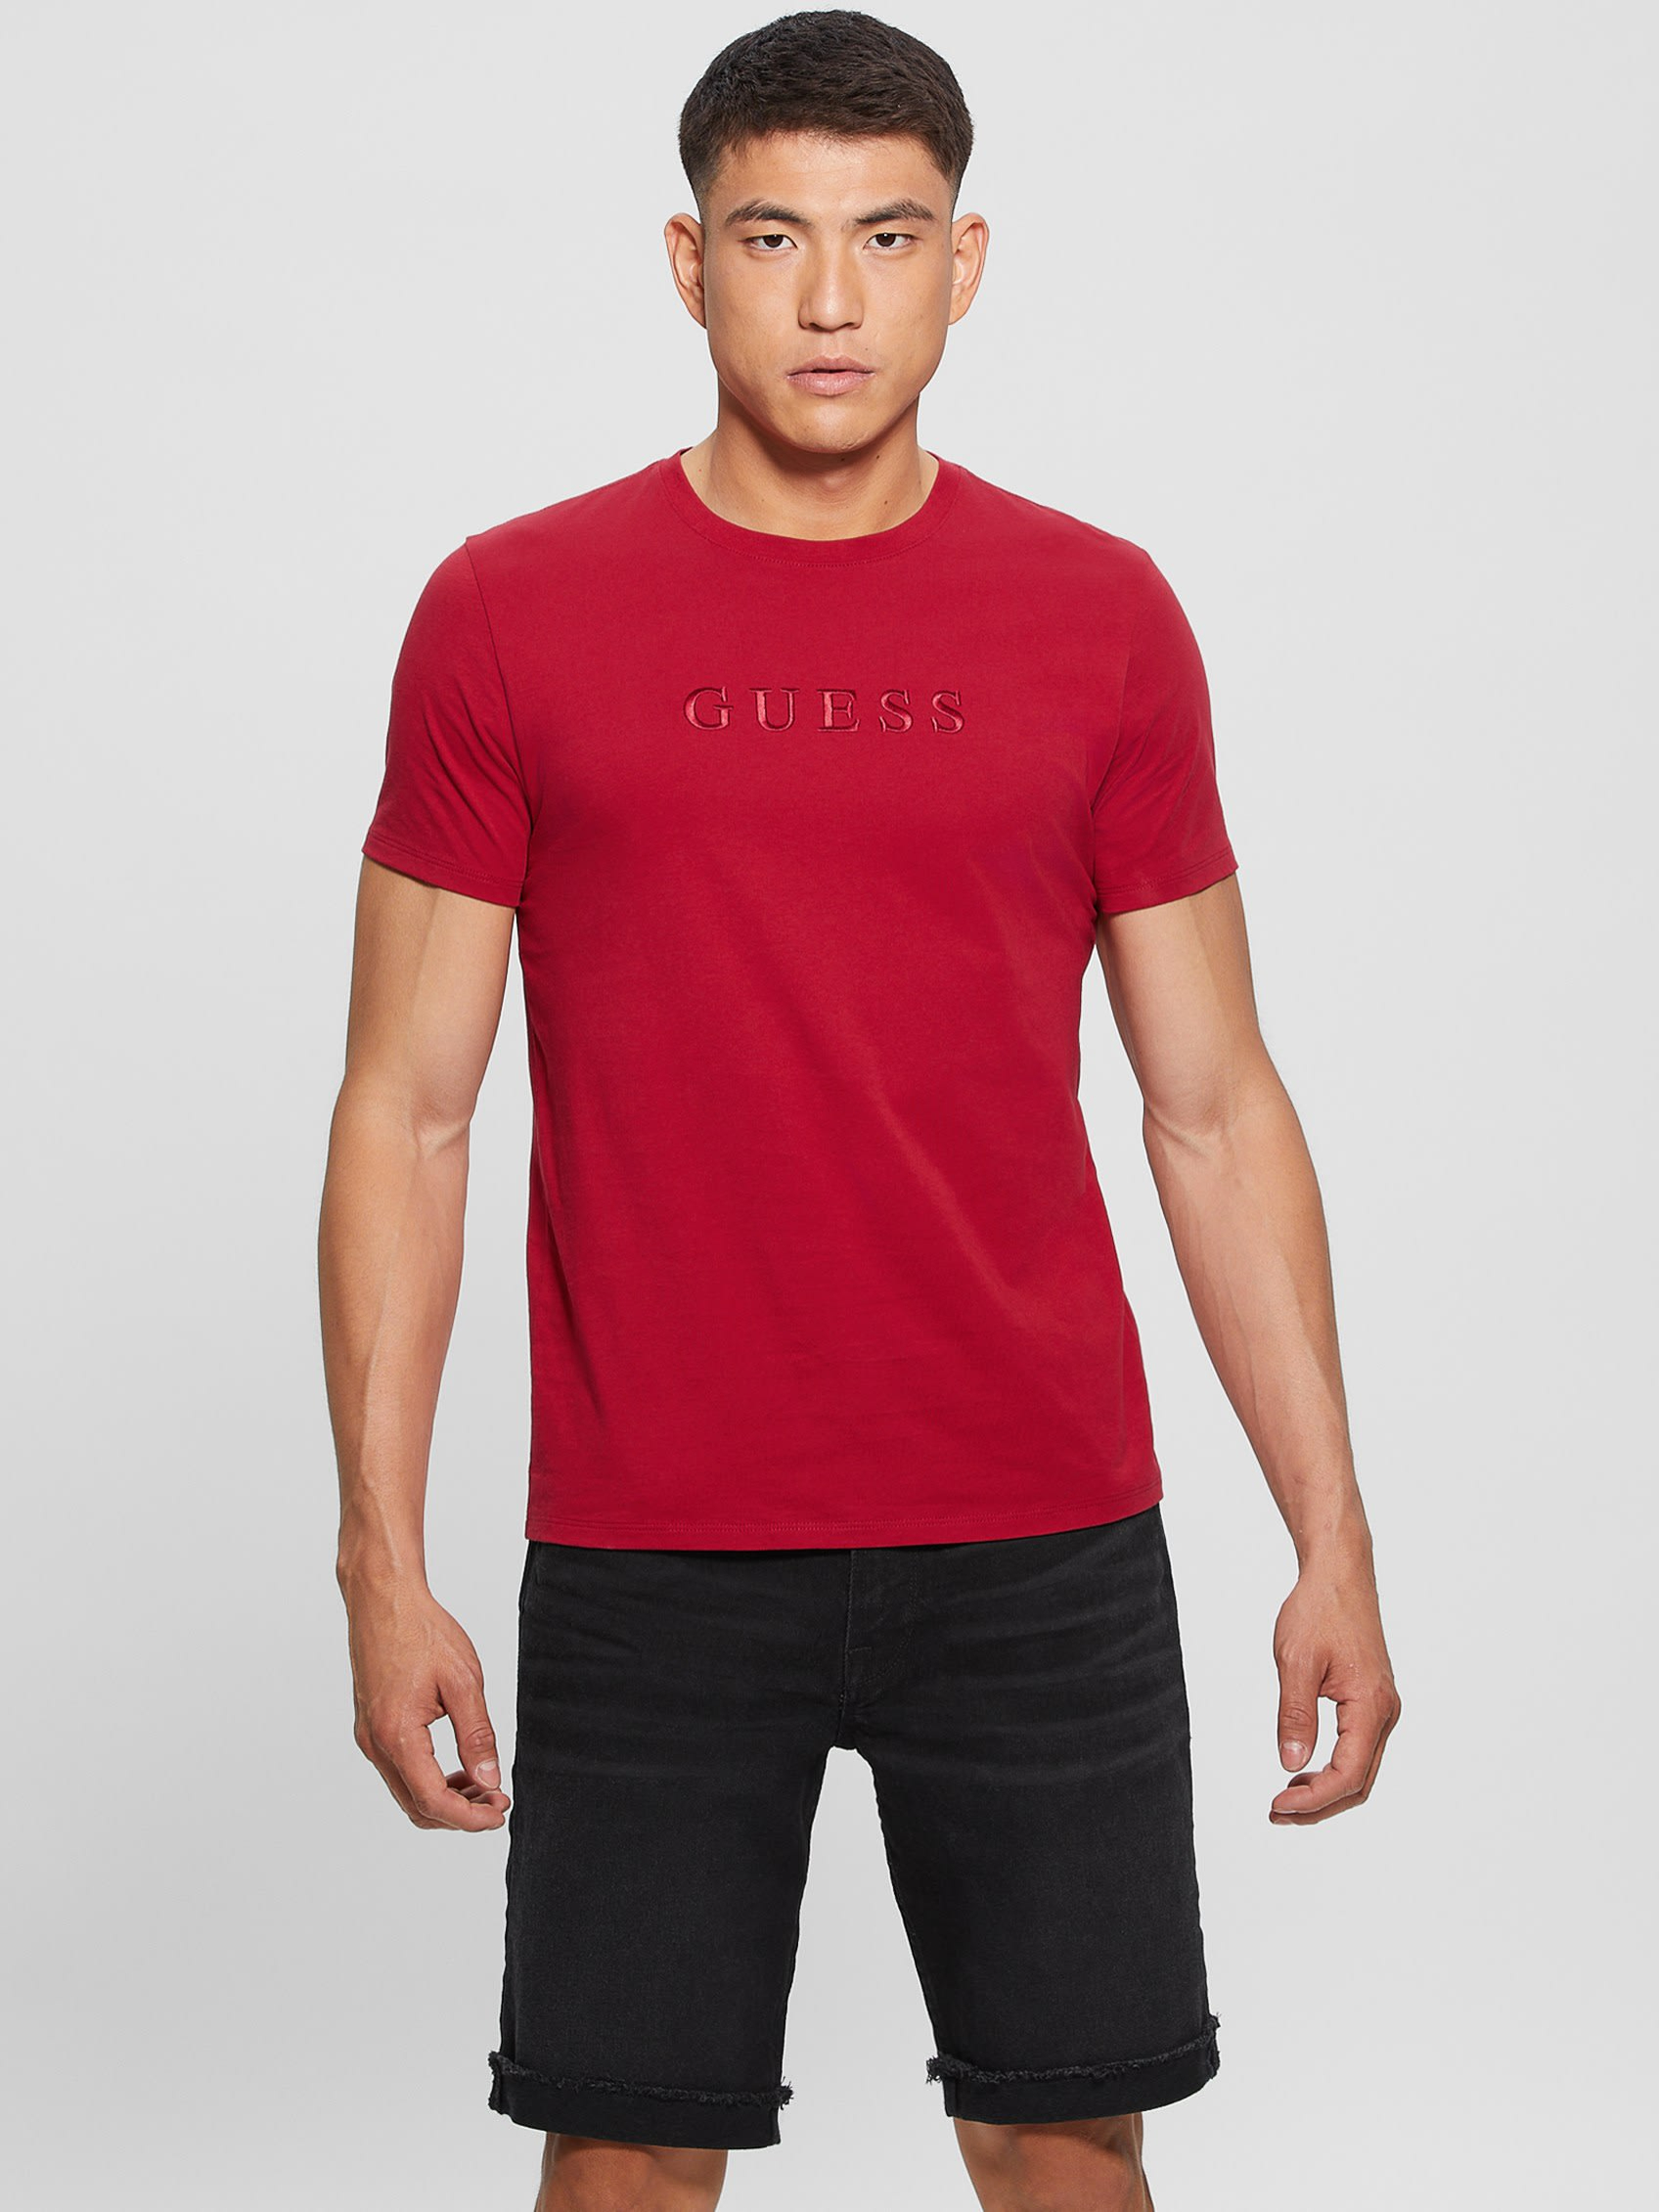 CLASSIC PIMA EMBROIDERED LOGO TEE | Guess Philippines